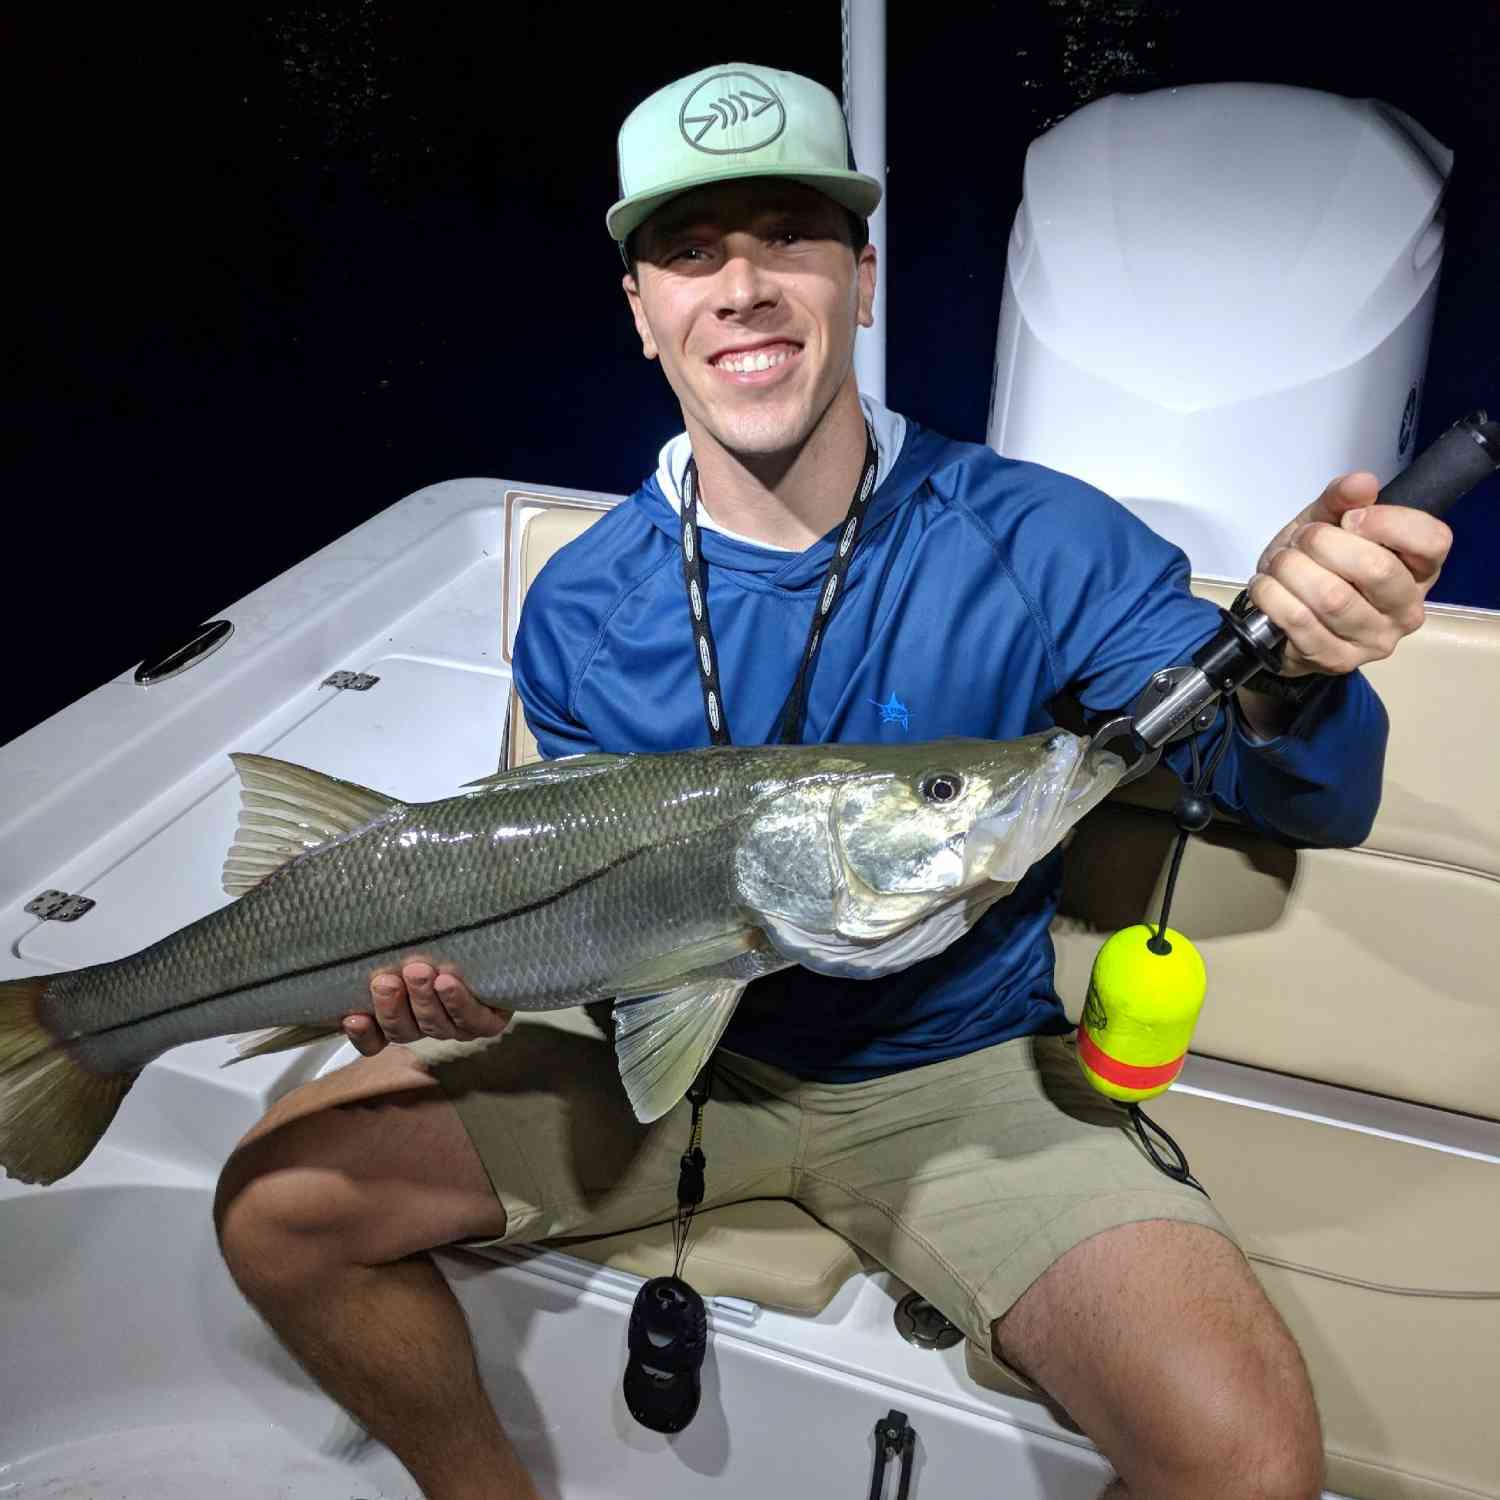 One of the biggest Snook I have ever caught.